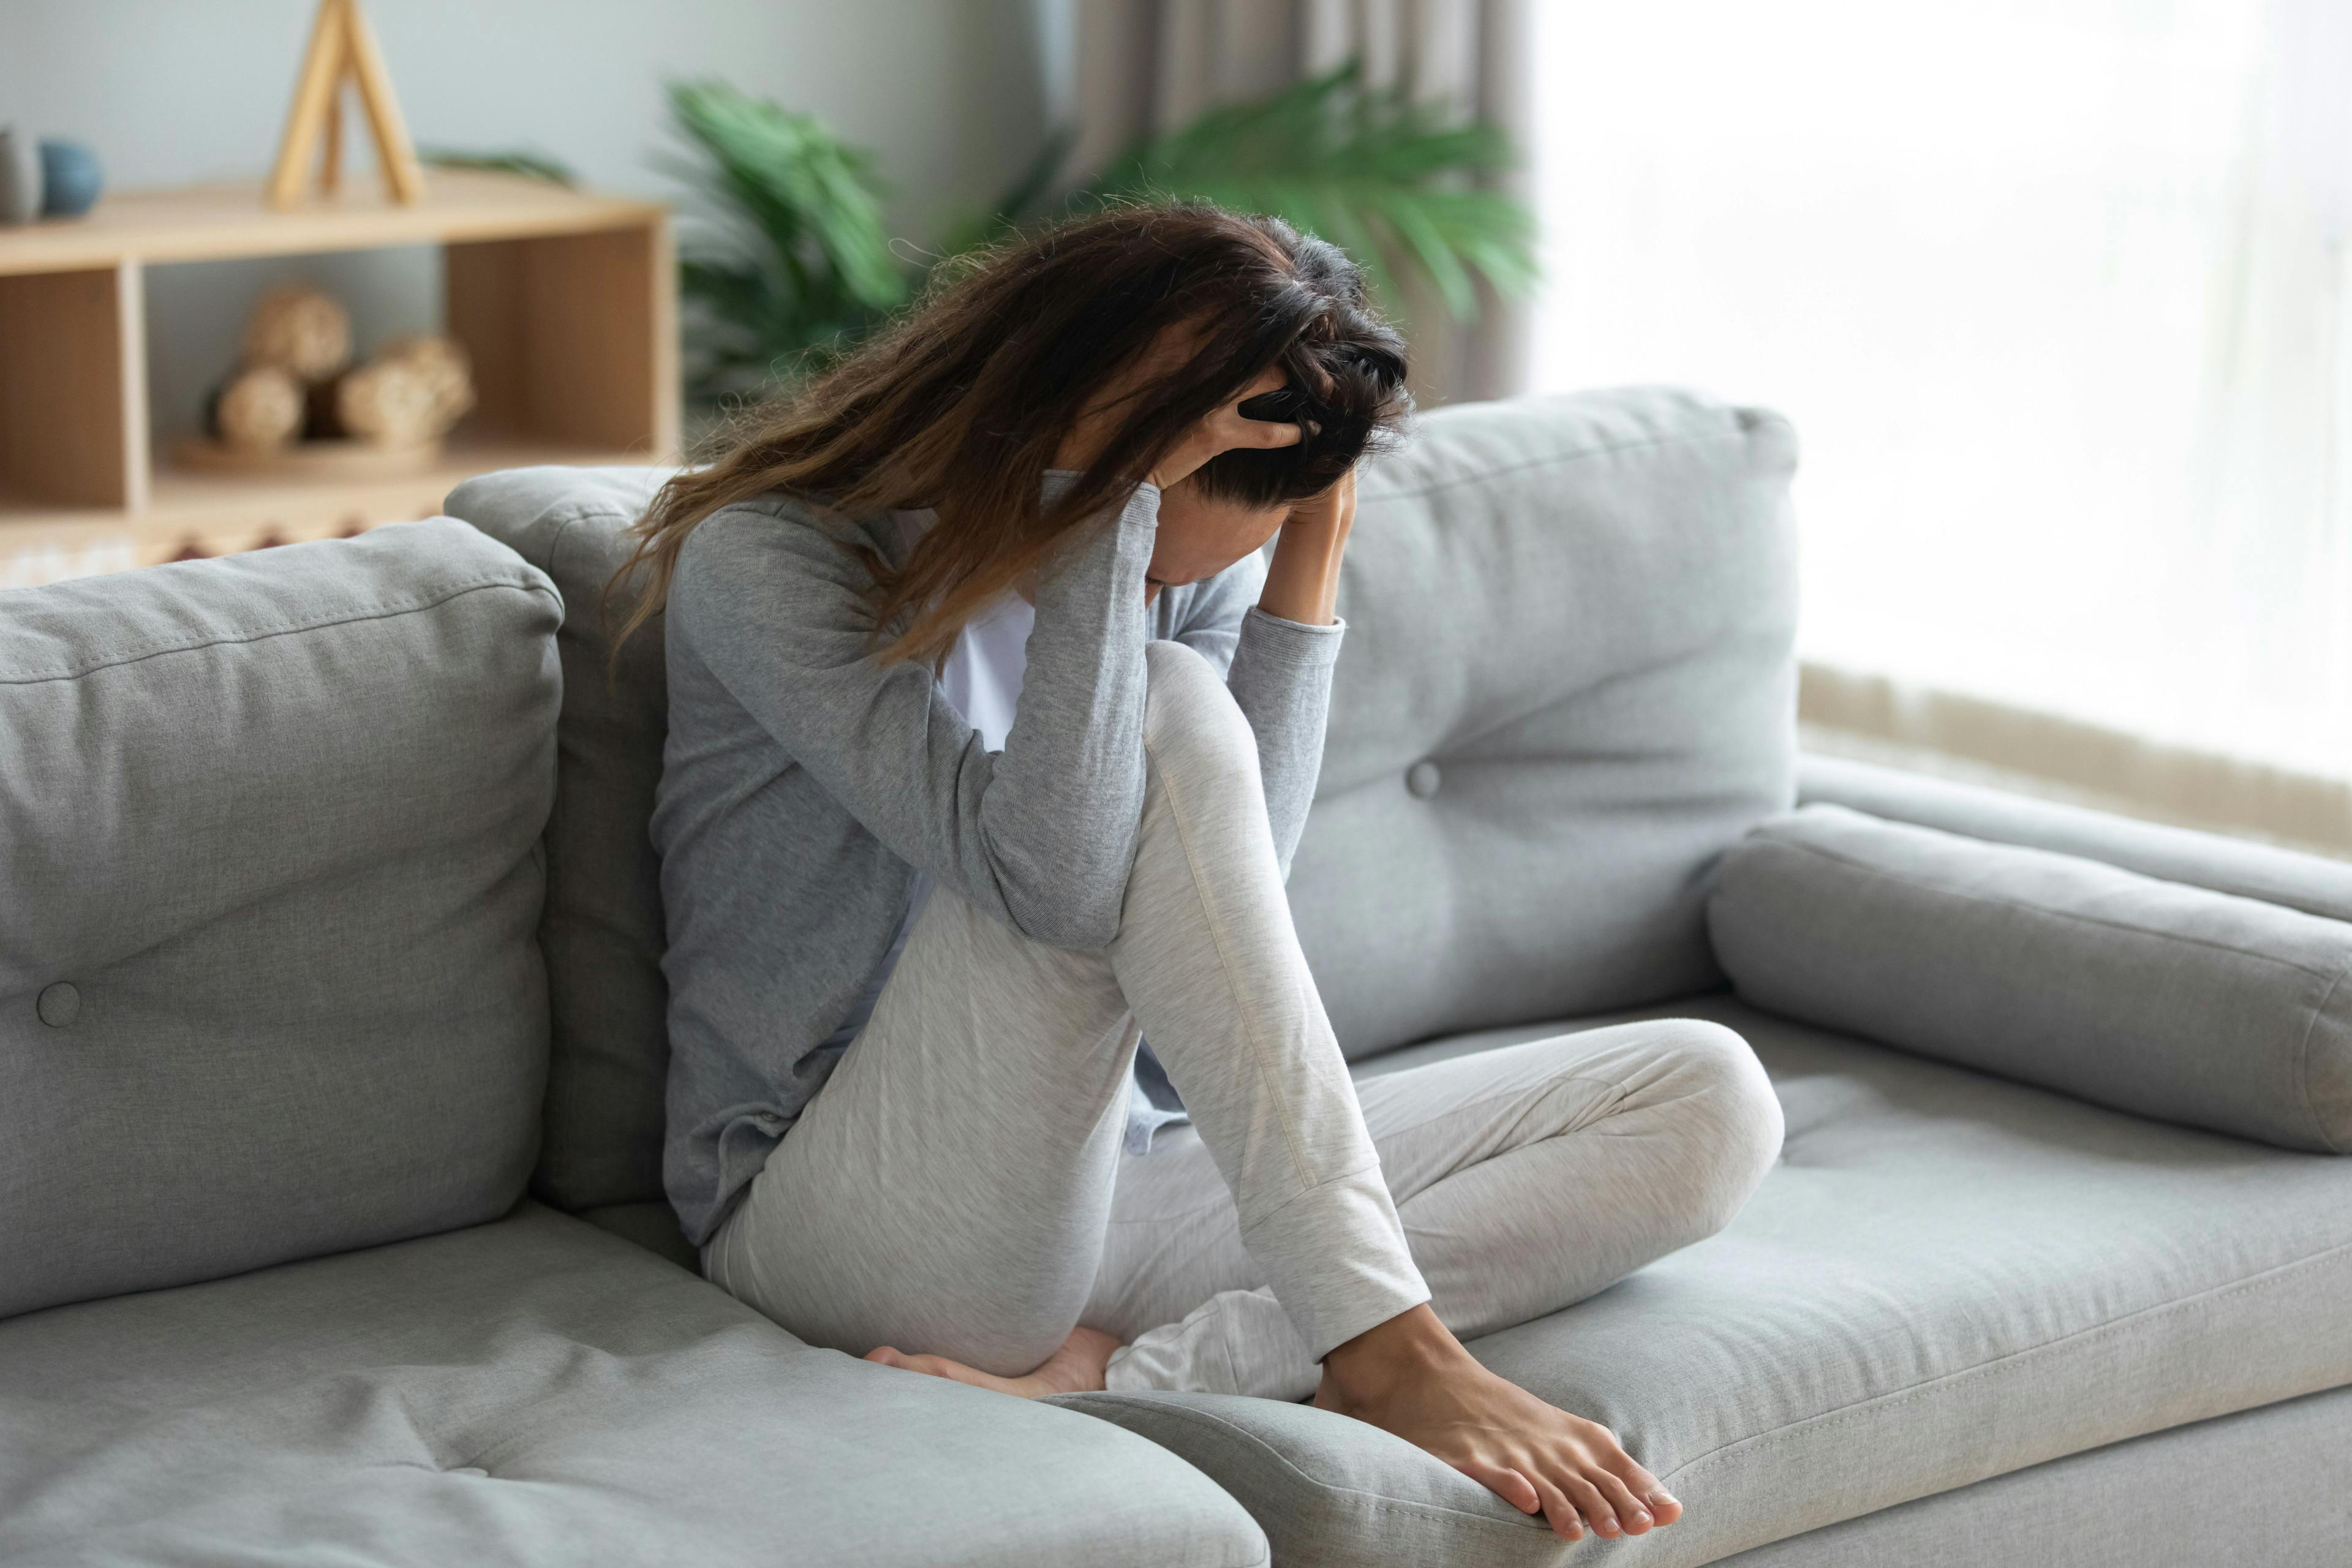 Anxiety, Depression Highly Prevalent in Patients with Lupus Nephritis